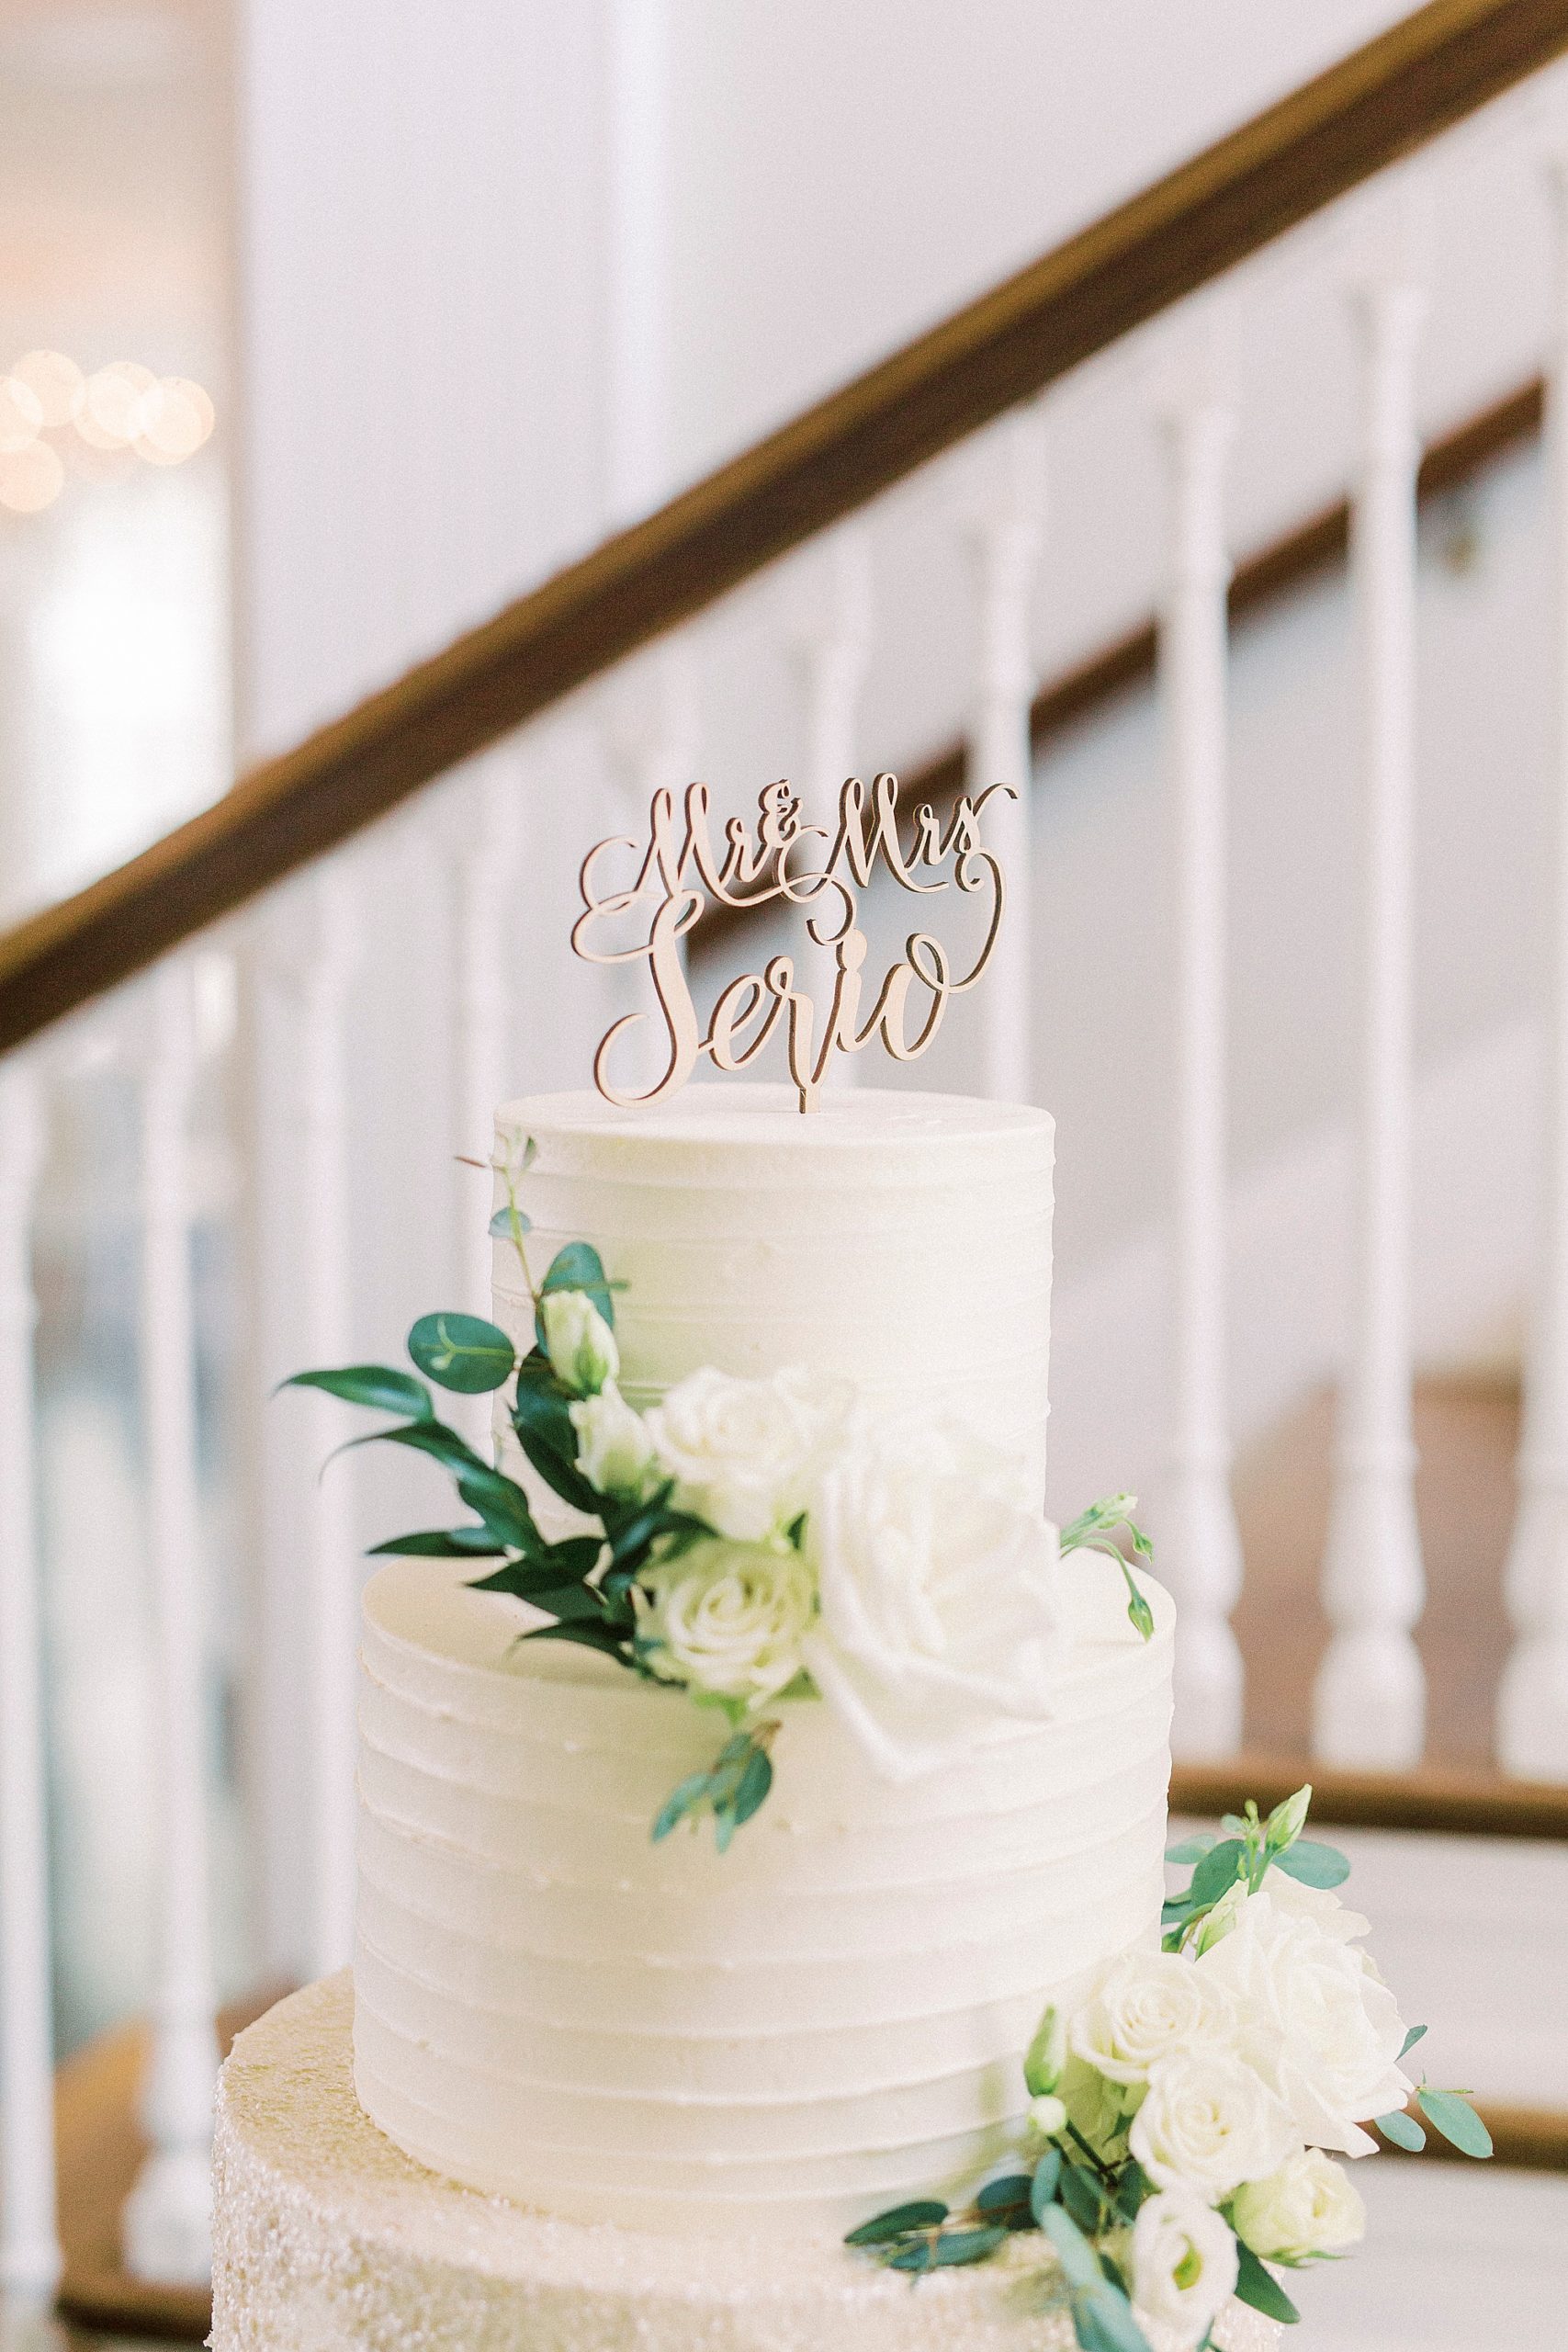 tiered wedding cake with wooden topper and floral accents